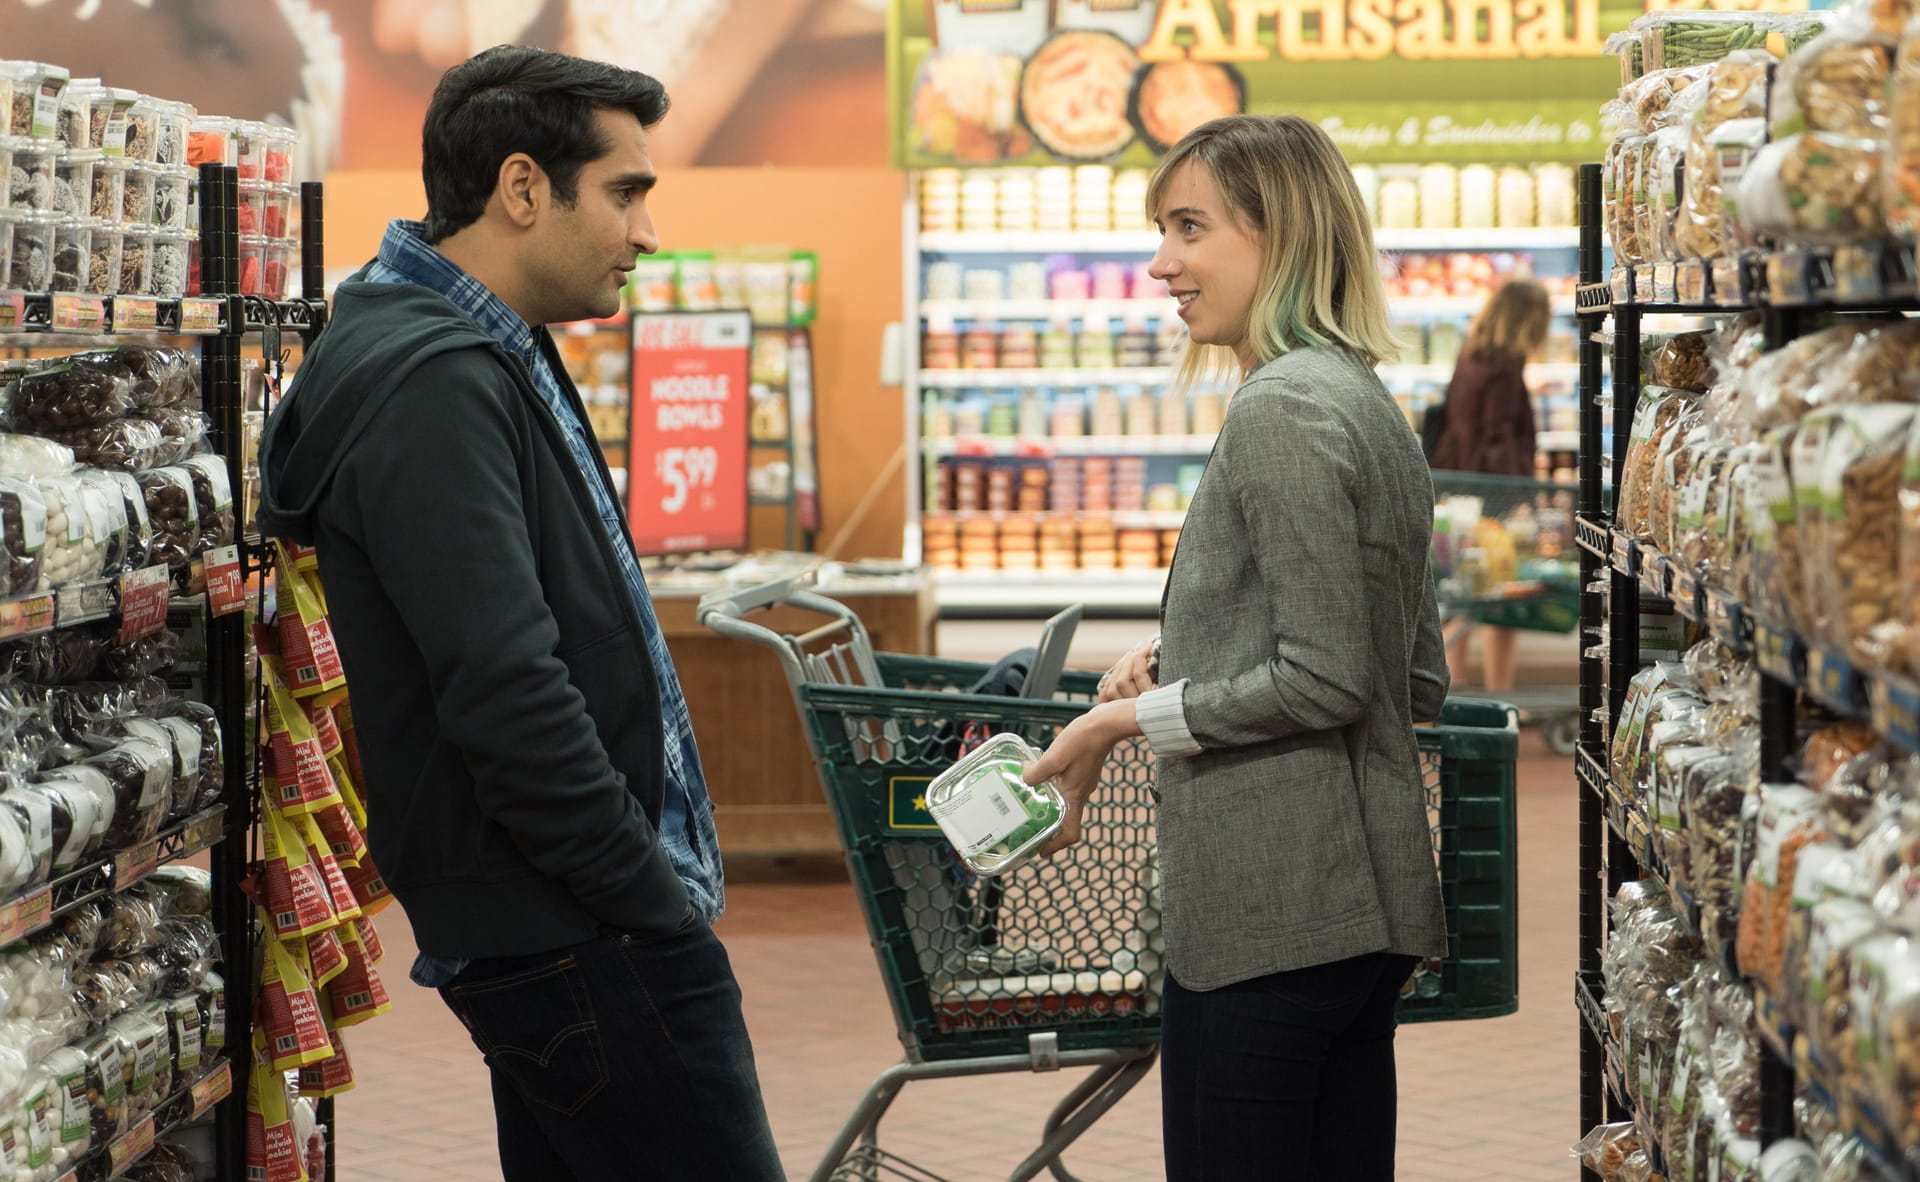 Kumail (Kumail Nanjiani) and Emily (Zoe Kazan) get to know each other in The Big Sick. Image via tvovermind.com | The Big Sick movie review | onetakekate.com